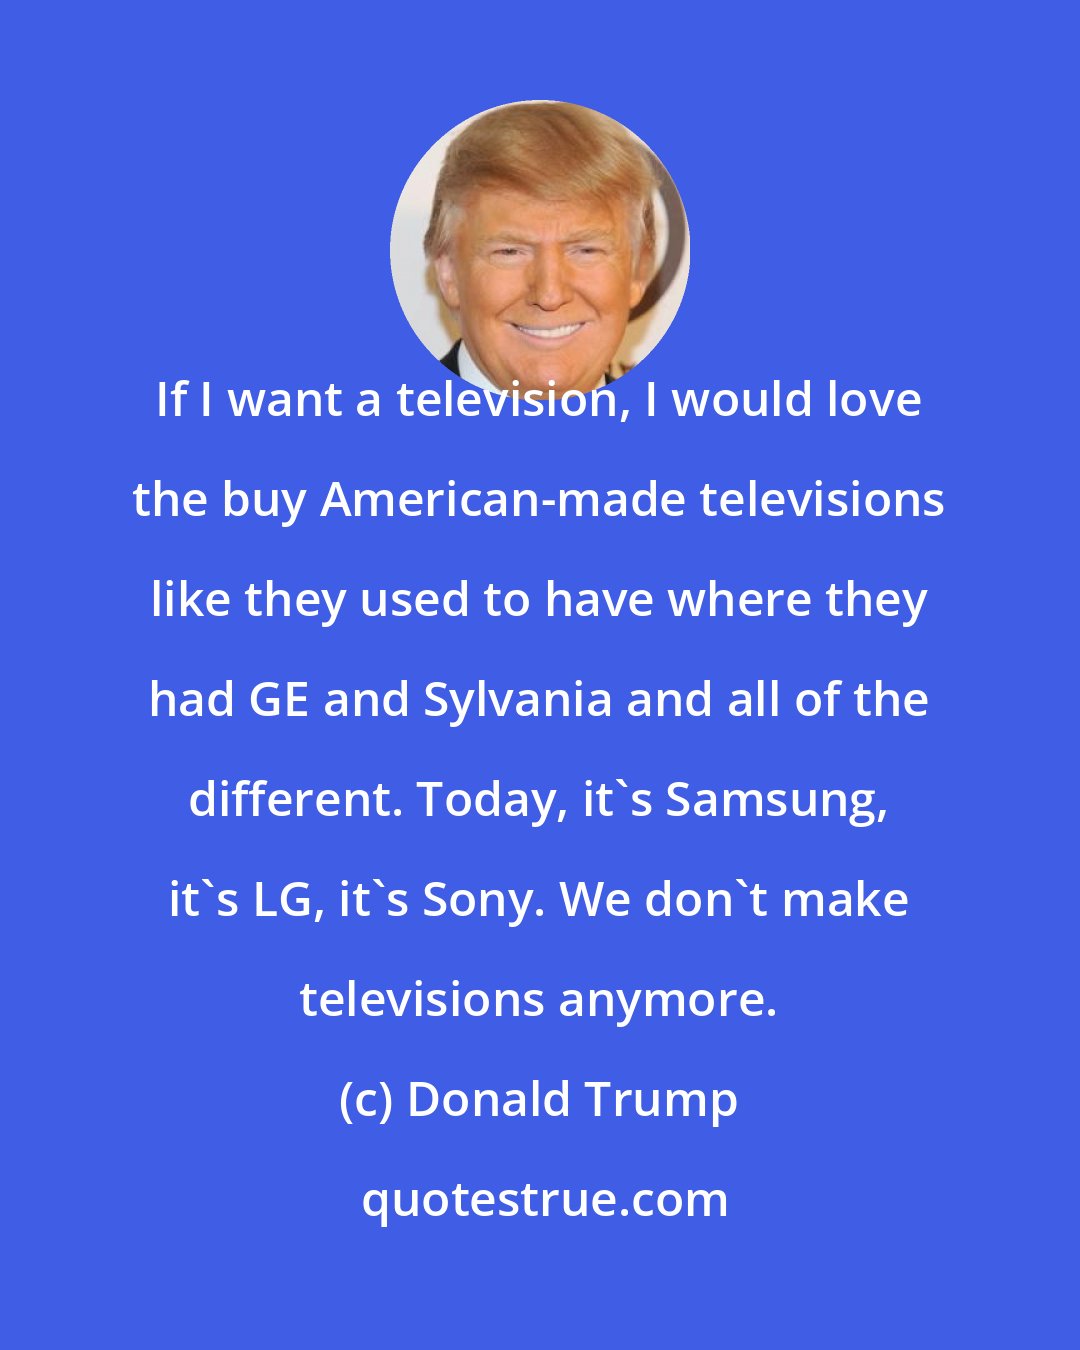 Donald Trump: If I want a television, I would love the buy American-made televisions like they used to have where they had GE and Sylvania and all of the different. Today, it's Samsung, it's LG, it's Sony. We don't make televisions anymore.